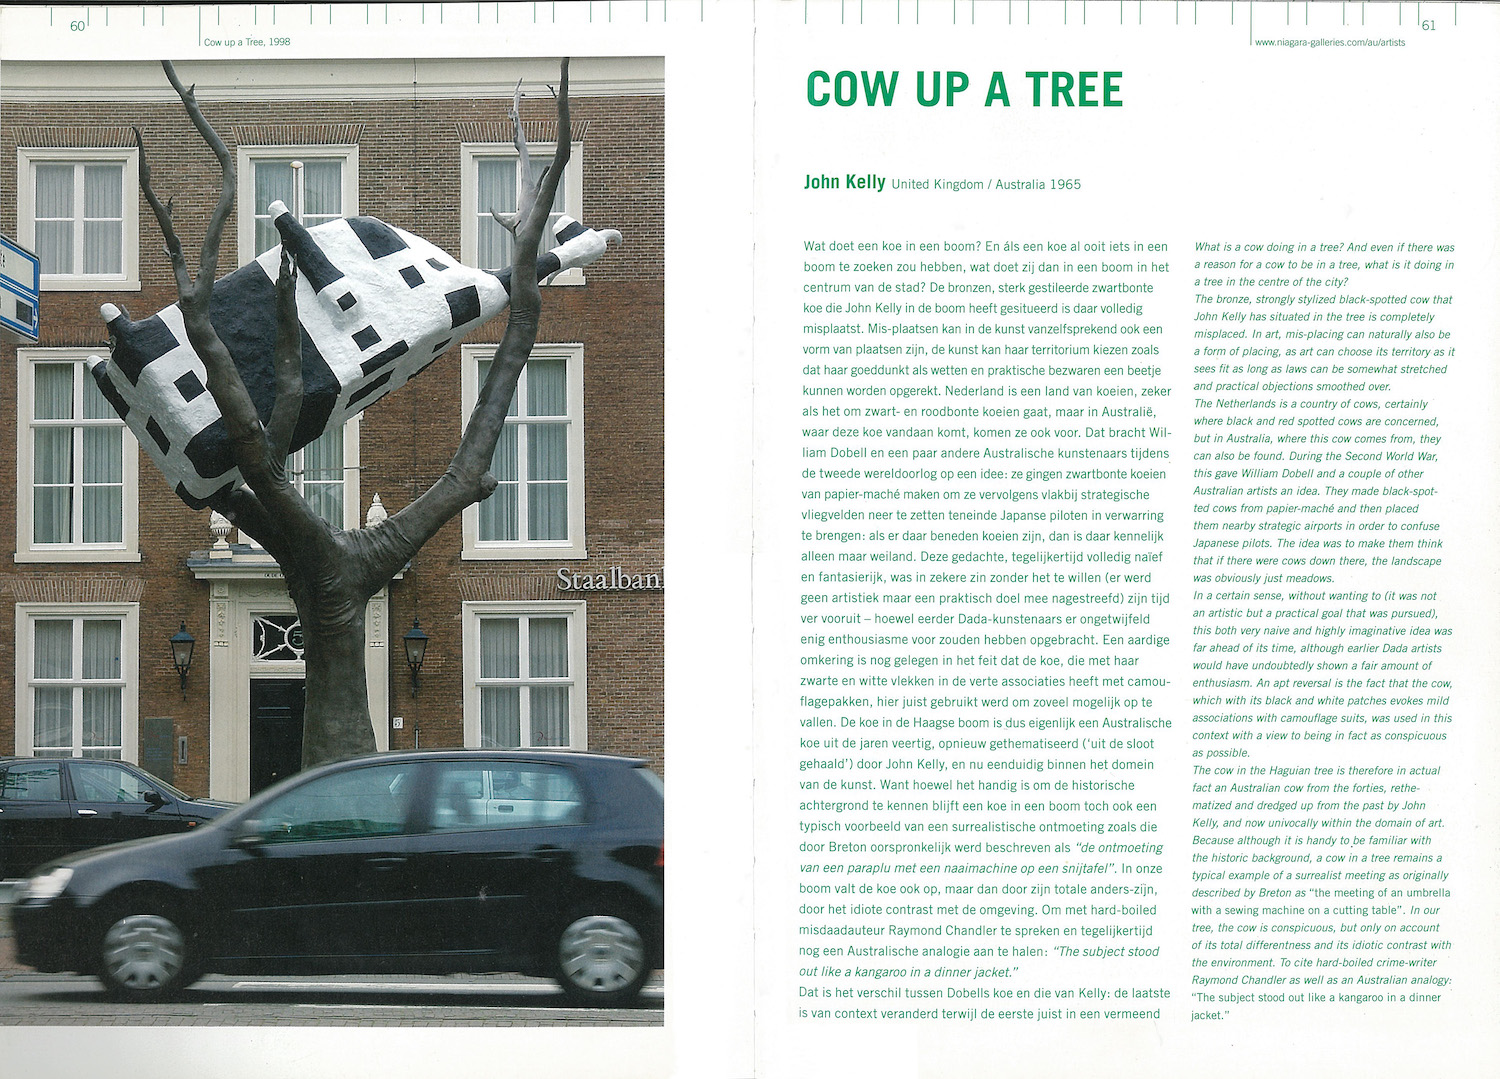 Cow up a Tree, The Hague; parallel text in Dutch then English; two-page spread; on the left page there is a photo of Cow up at Tree installed on a city street, with a black car passing in the foreground and a very neat three-storey building behind the sculpture